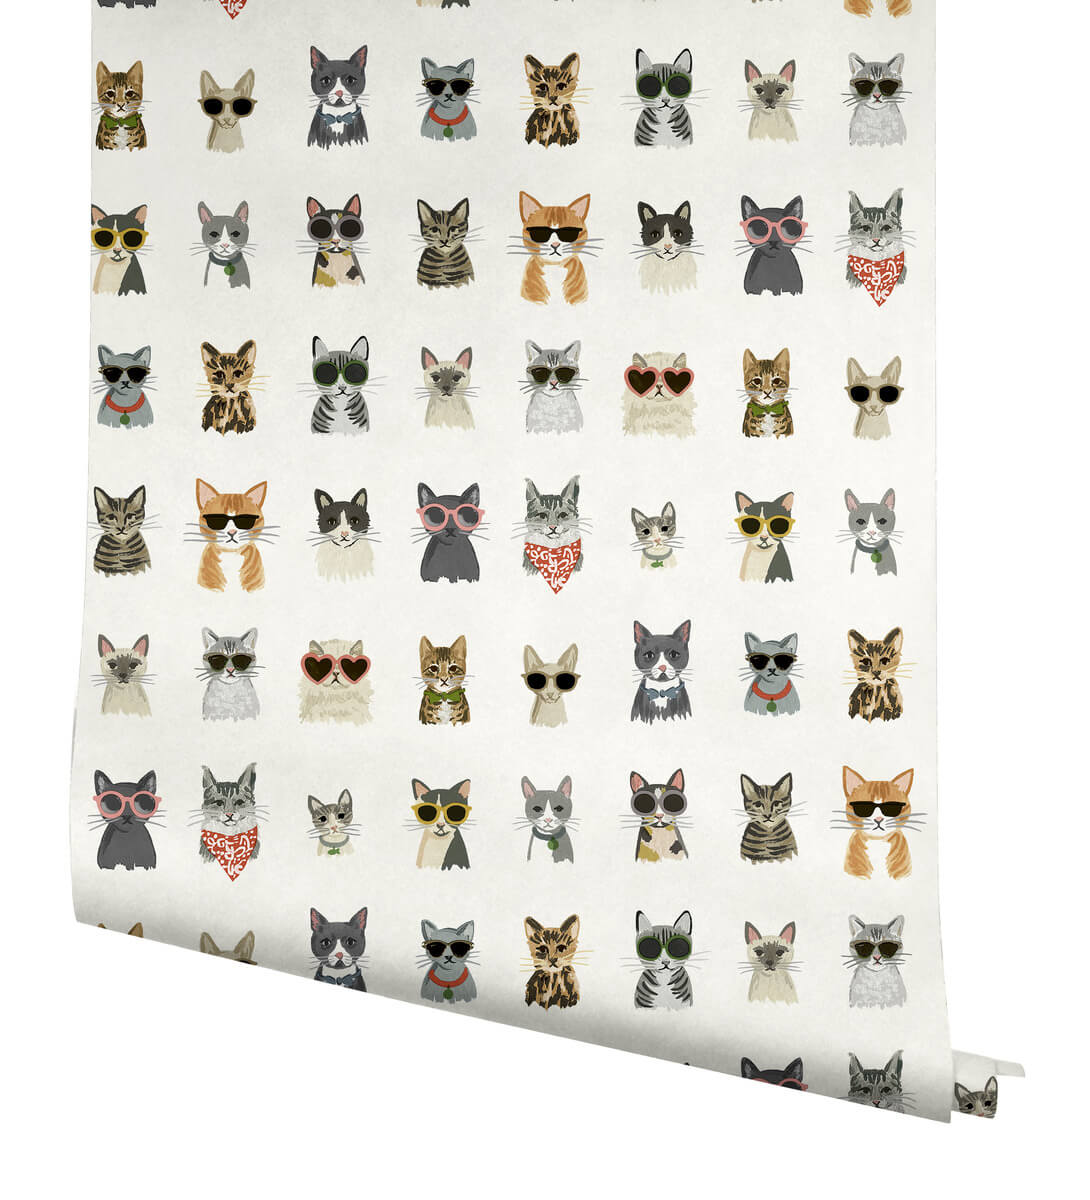 Angry Cat Fabric, Wallpaper and Home Decor